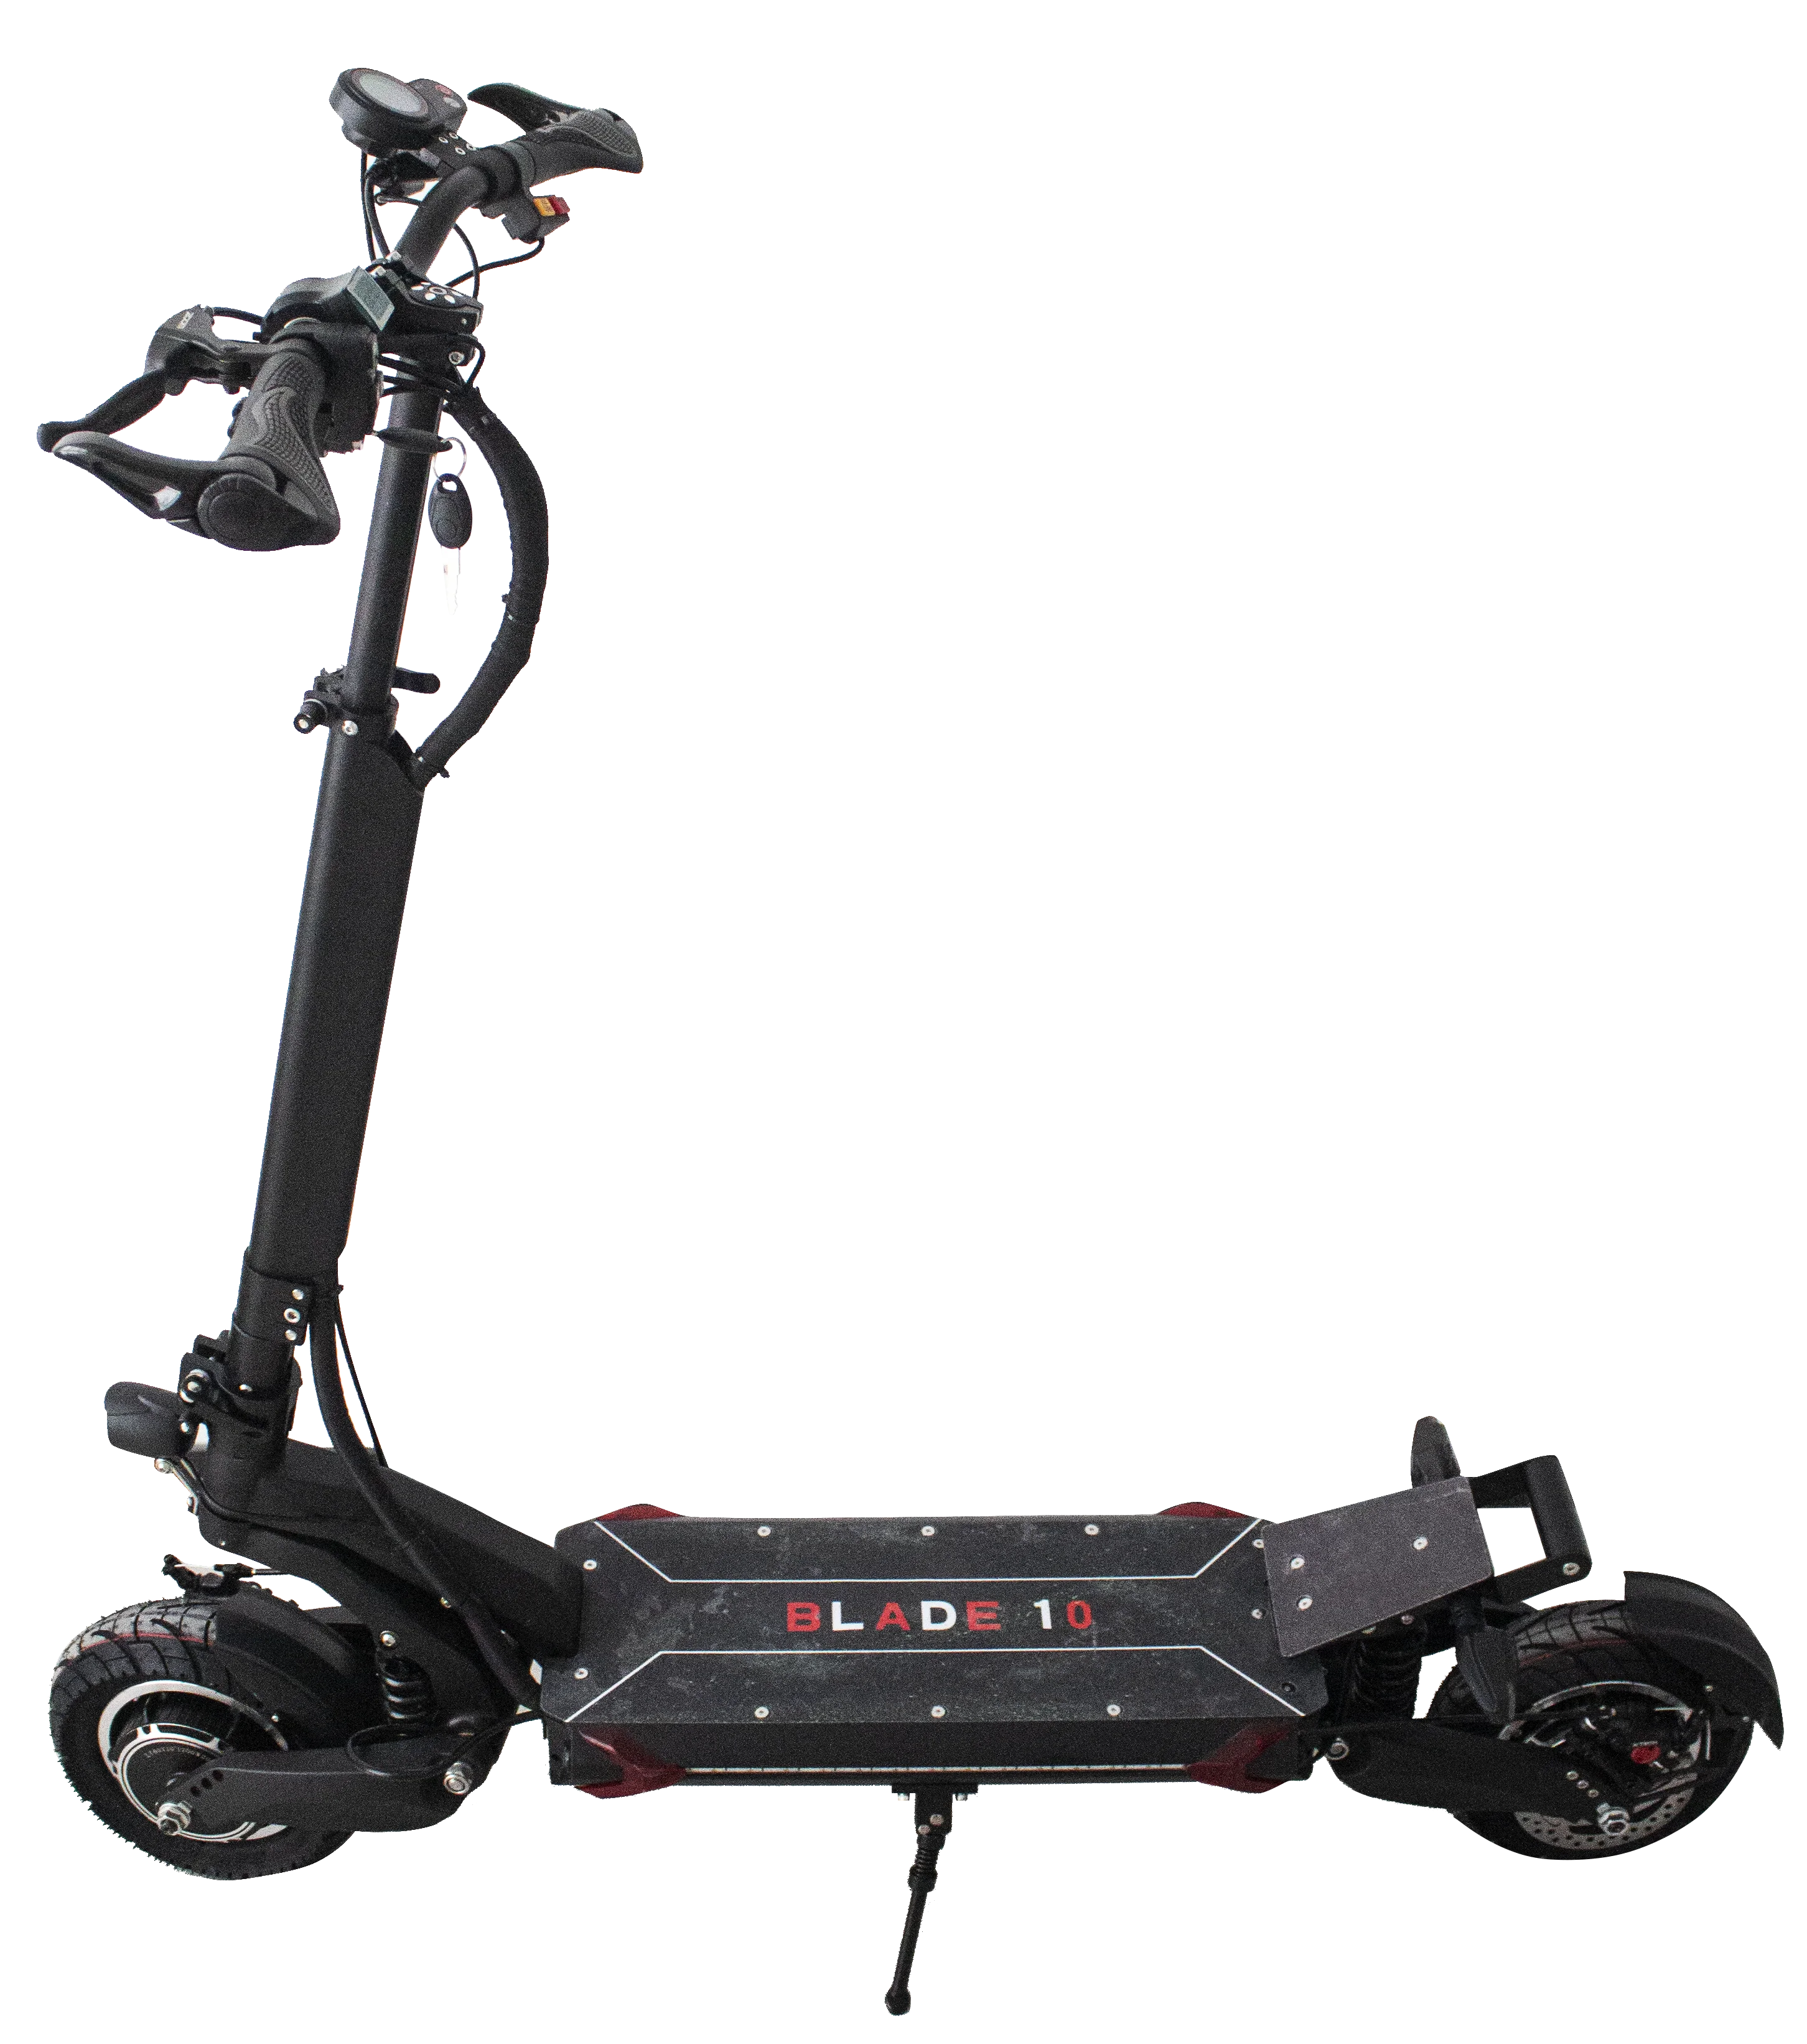 

2021 New product Blade 10 double 1200W motor 10 inch big size dual spring suspension adult folding electric kick scooter